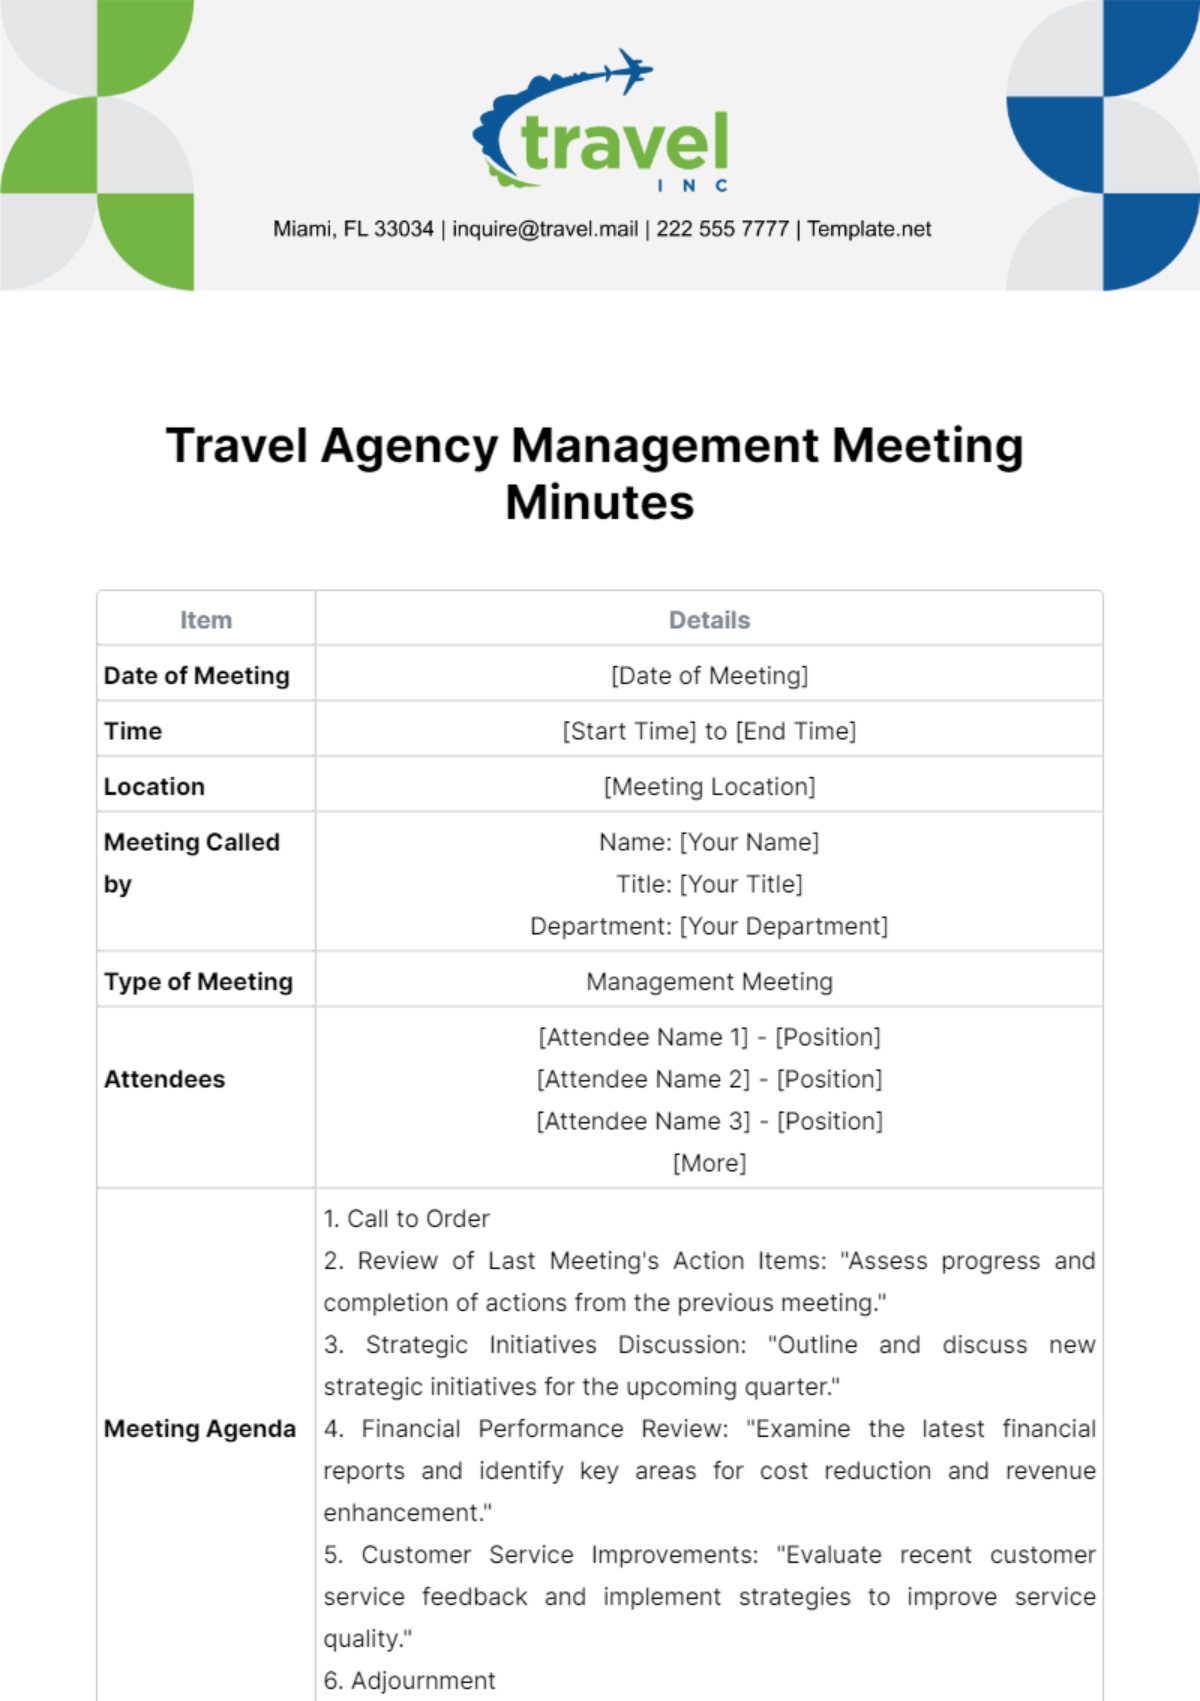 Travel Agency Management Meeting Minutes Template